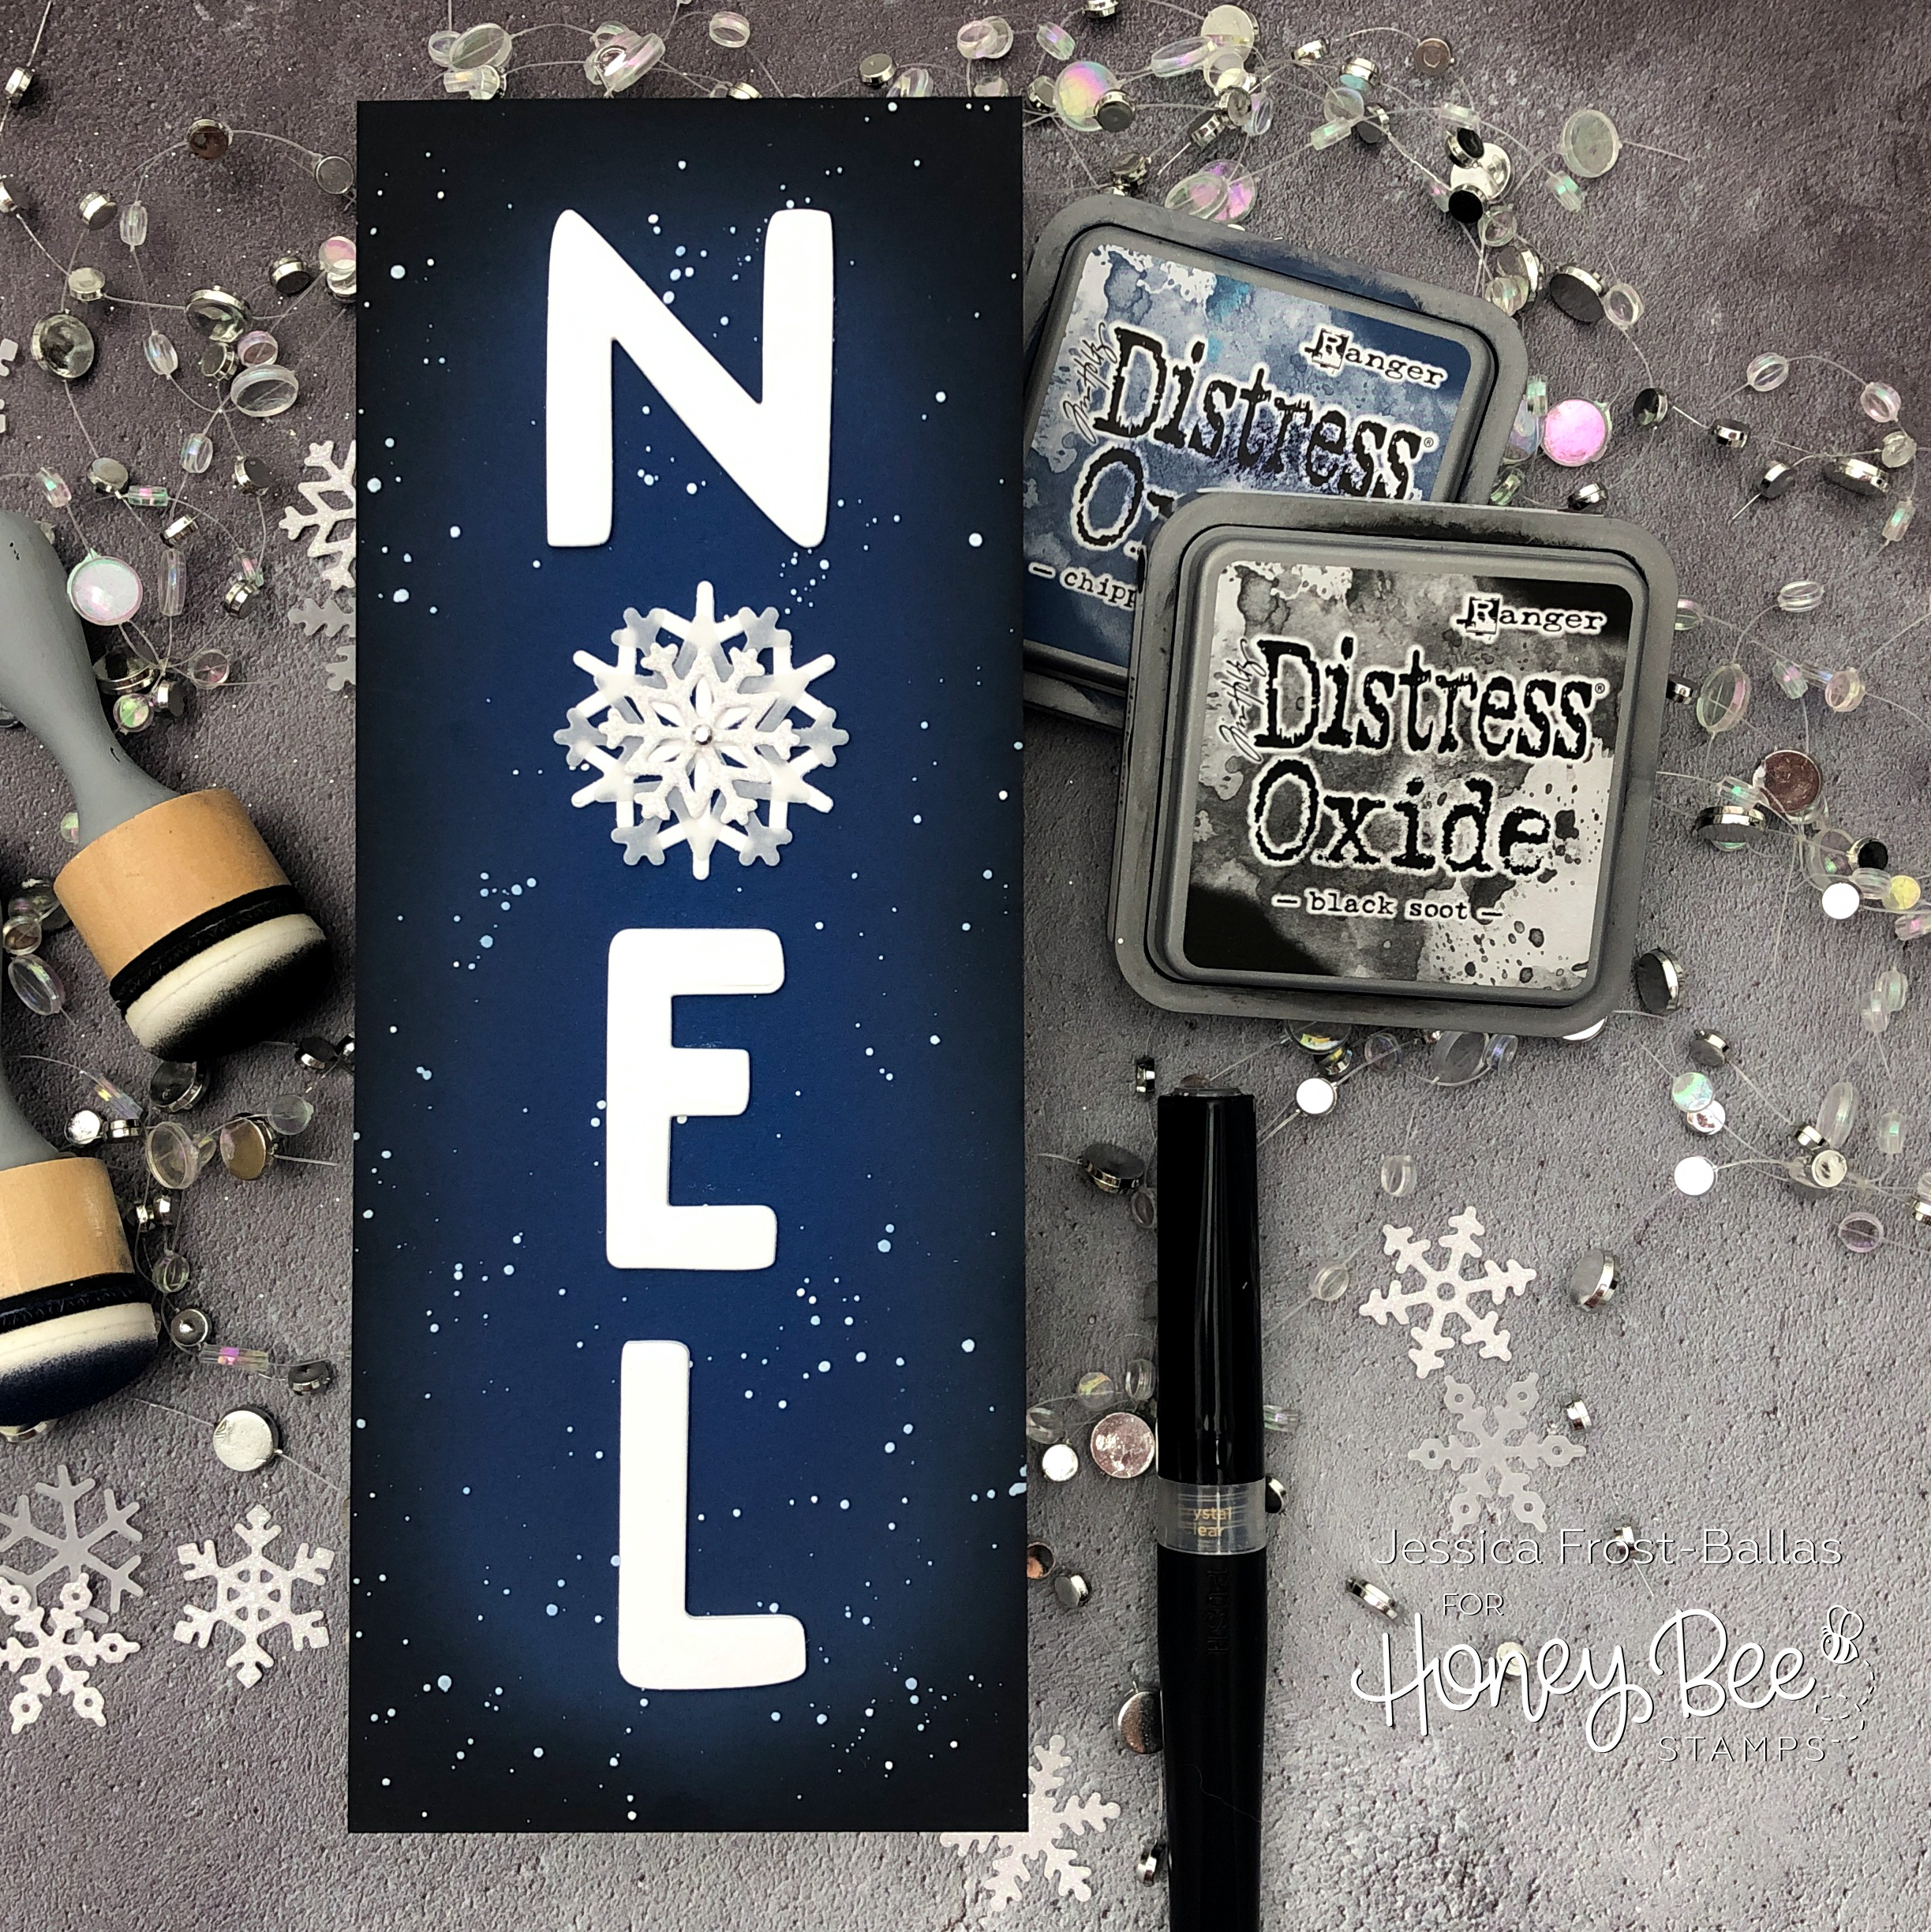 Noel by Jessica Frost-Ballas for Honey Bee Stamps